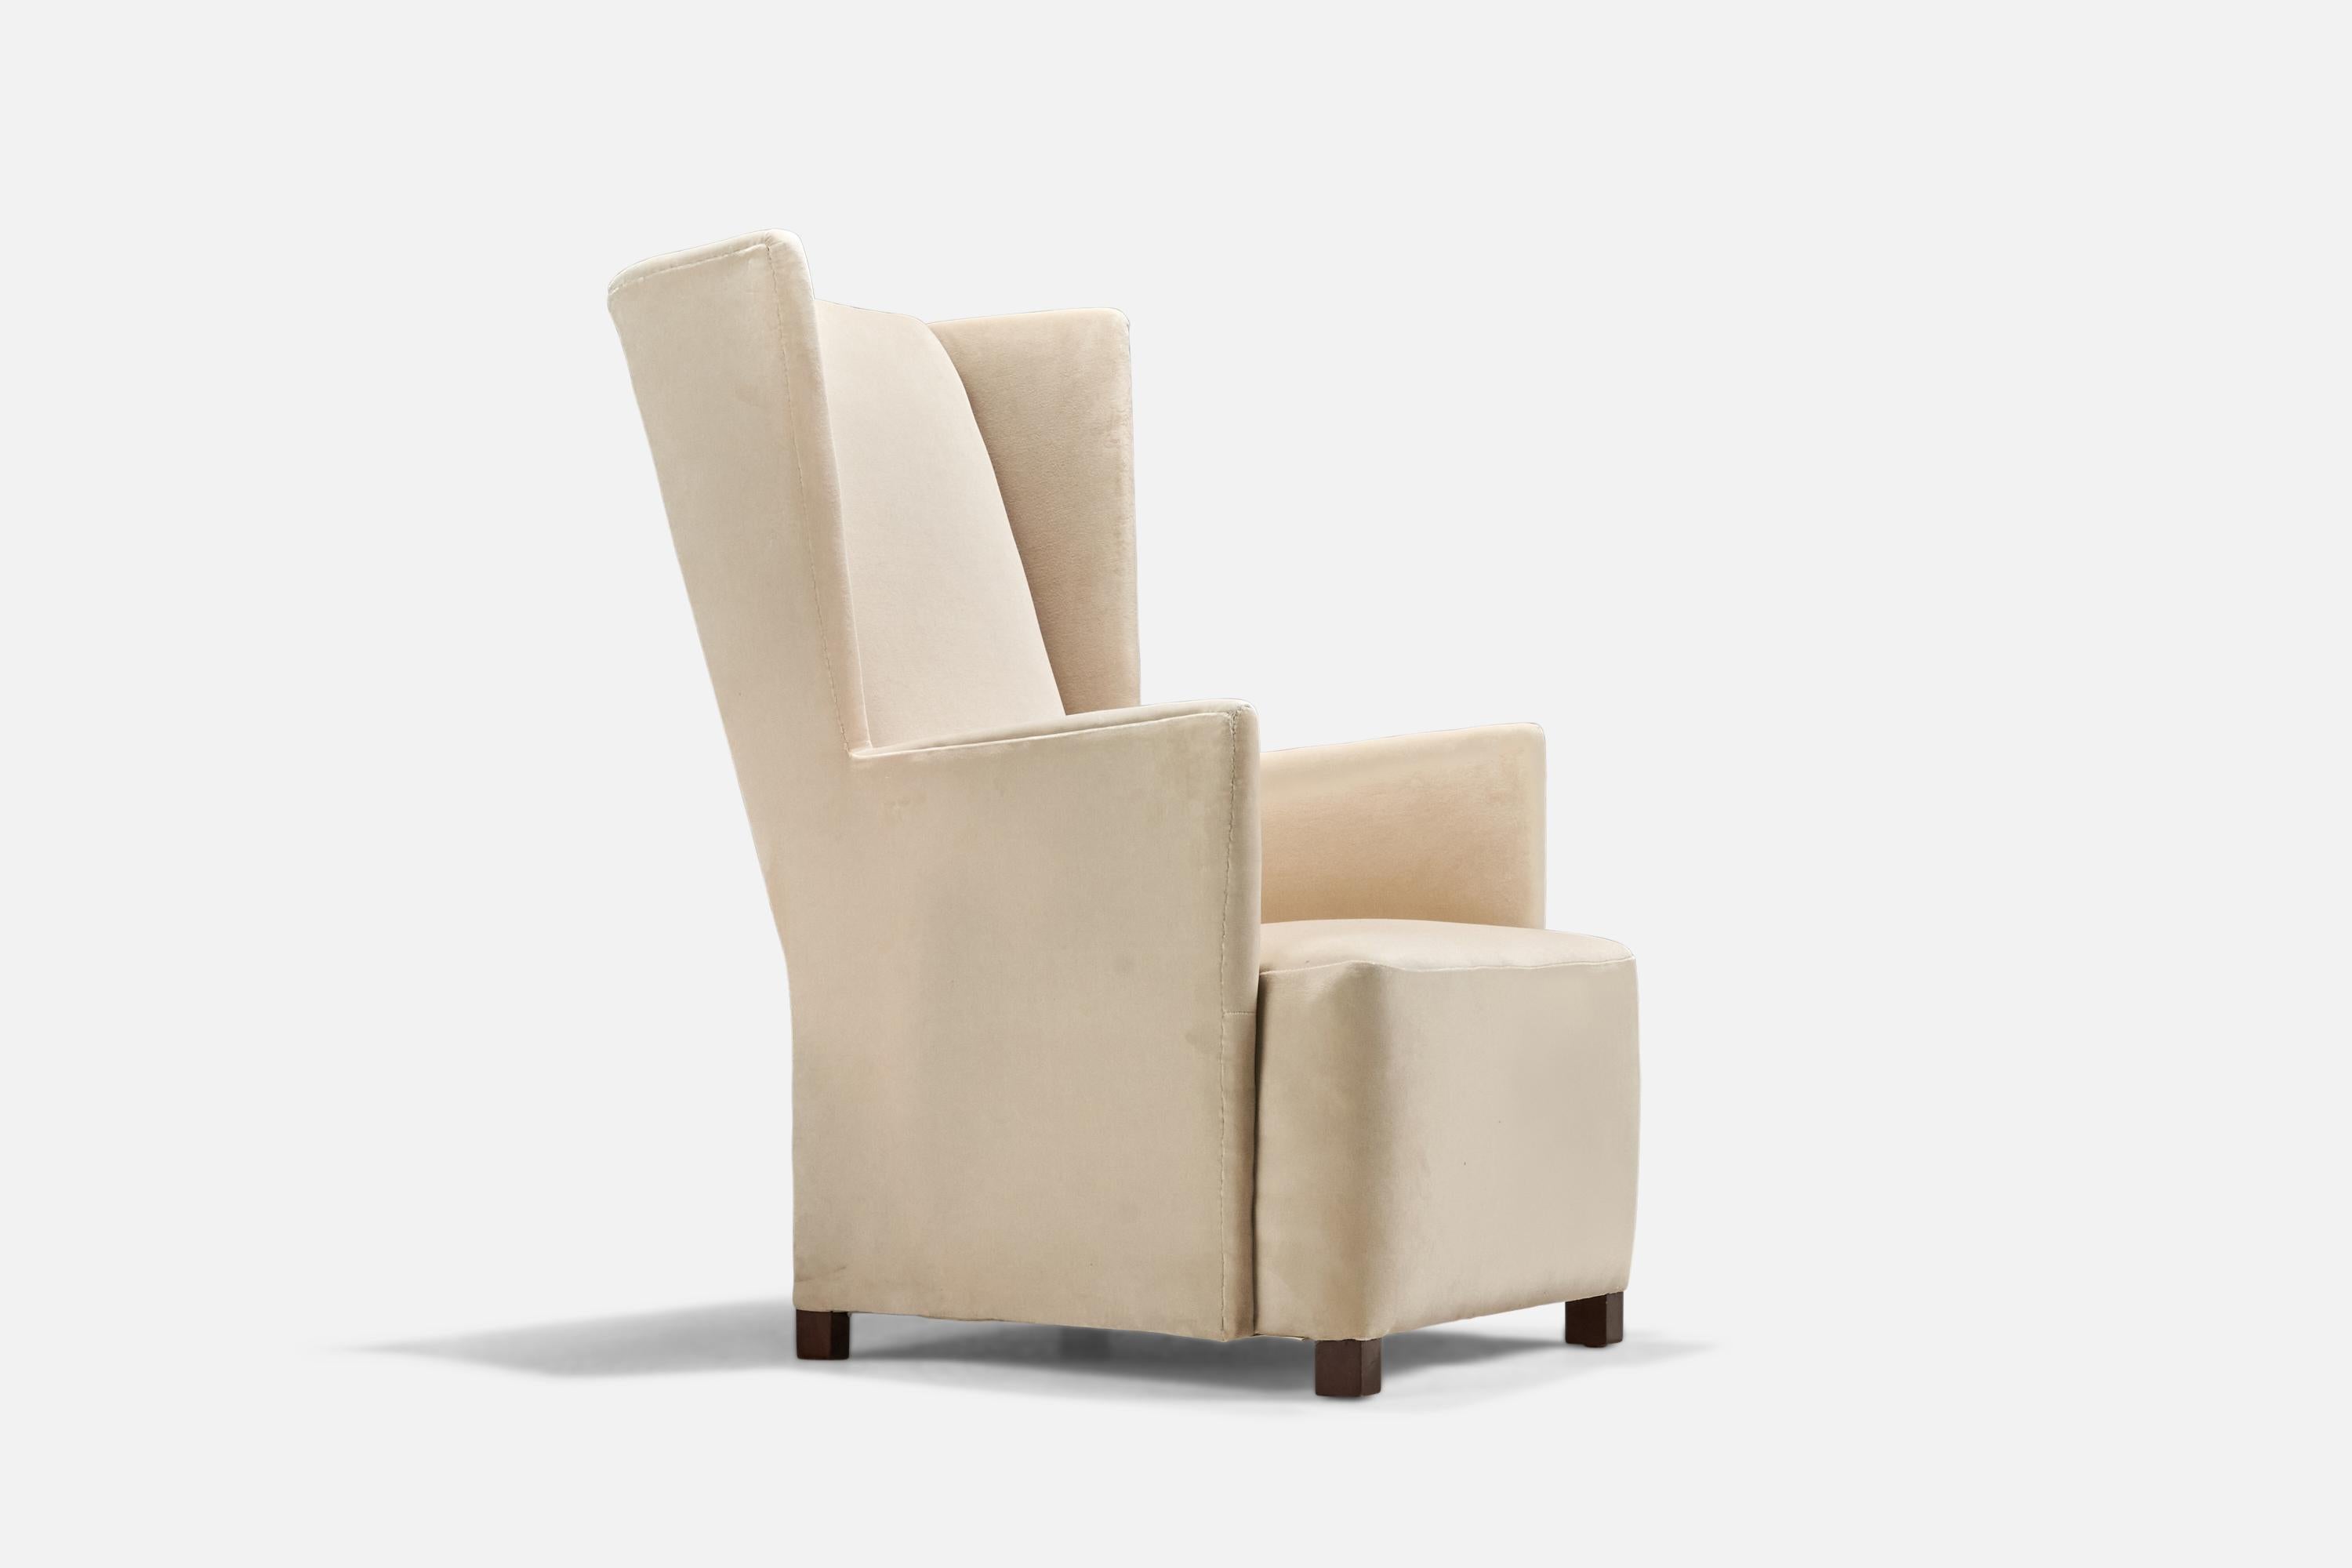 A modernist velvet and birch lounge chair designed by Bjorn Tragardh and Uno Åhren and produced by Svenskt Tenn, Sweden, 1930s.